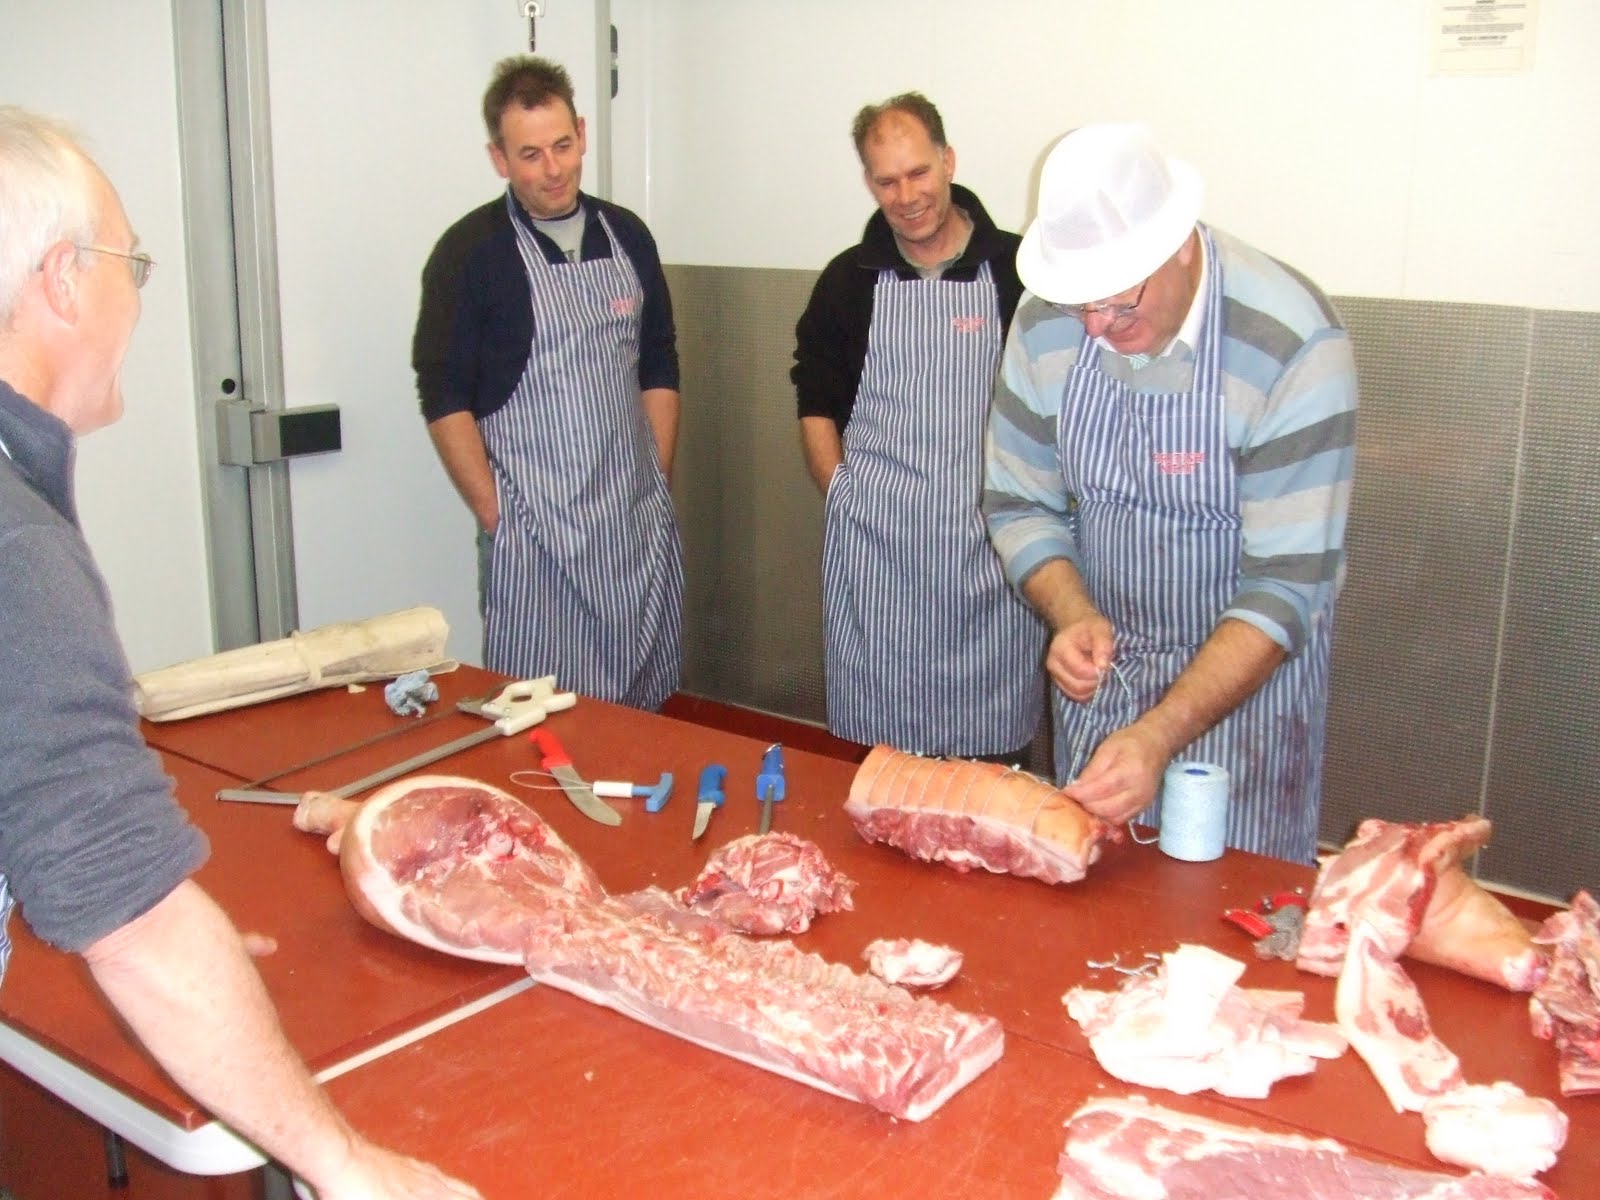 Butchery Pictures